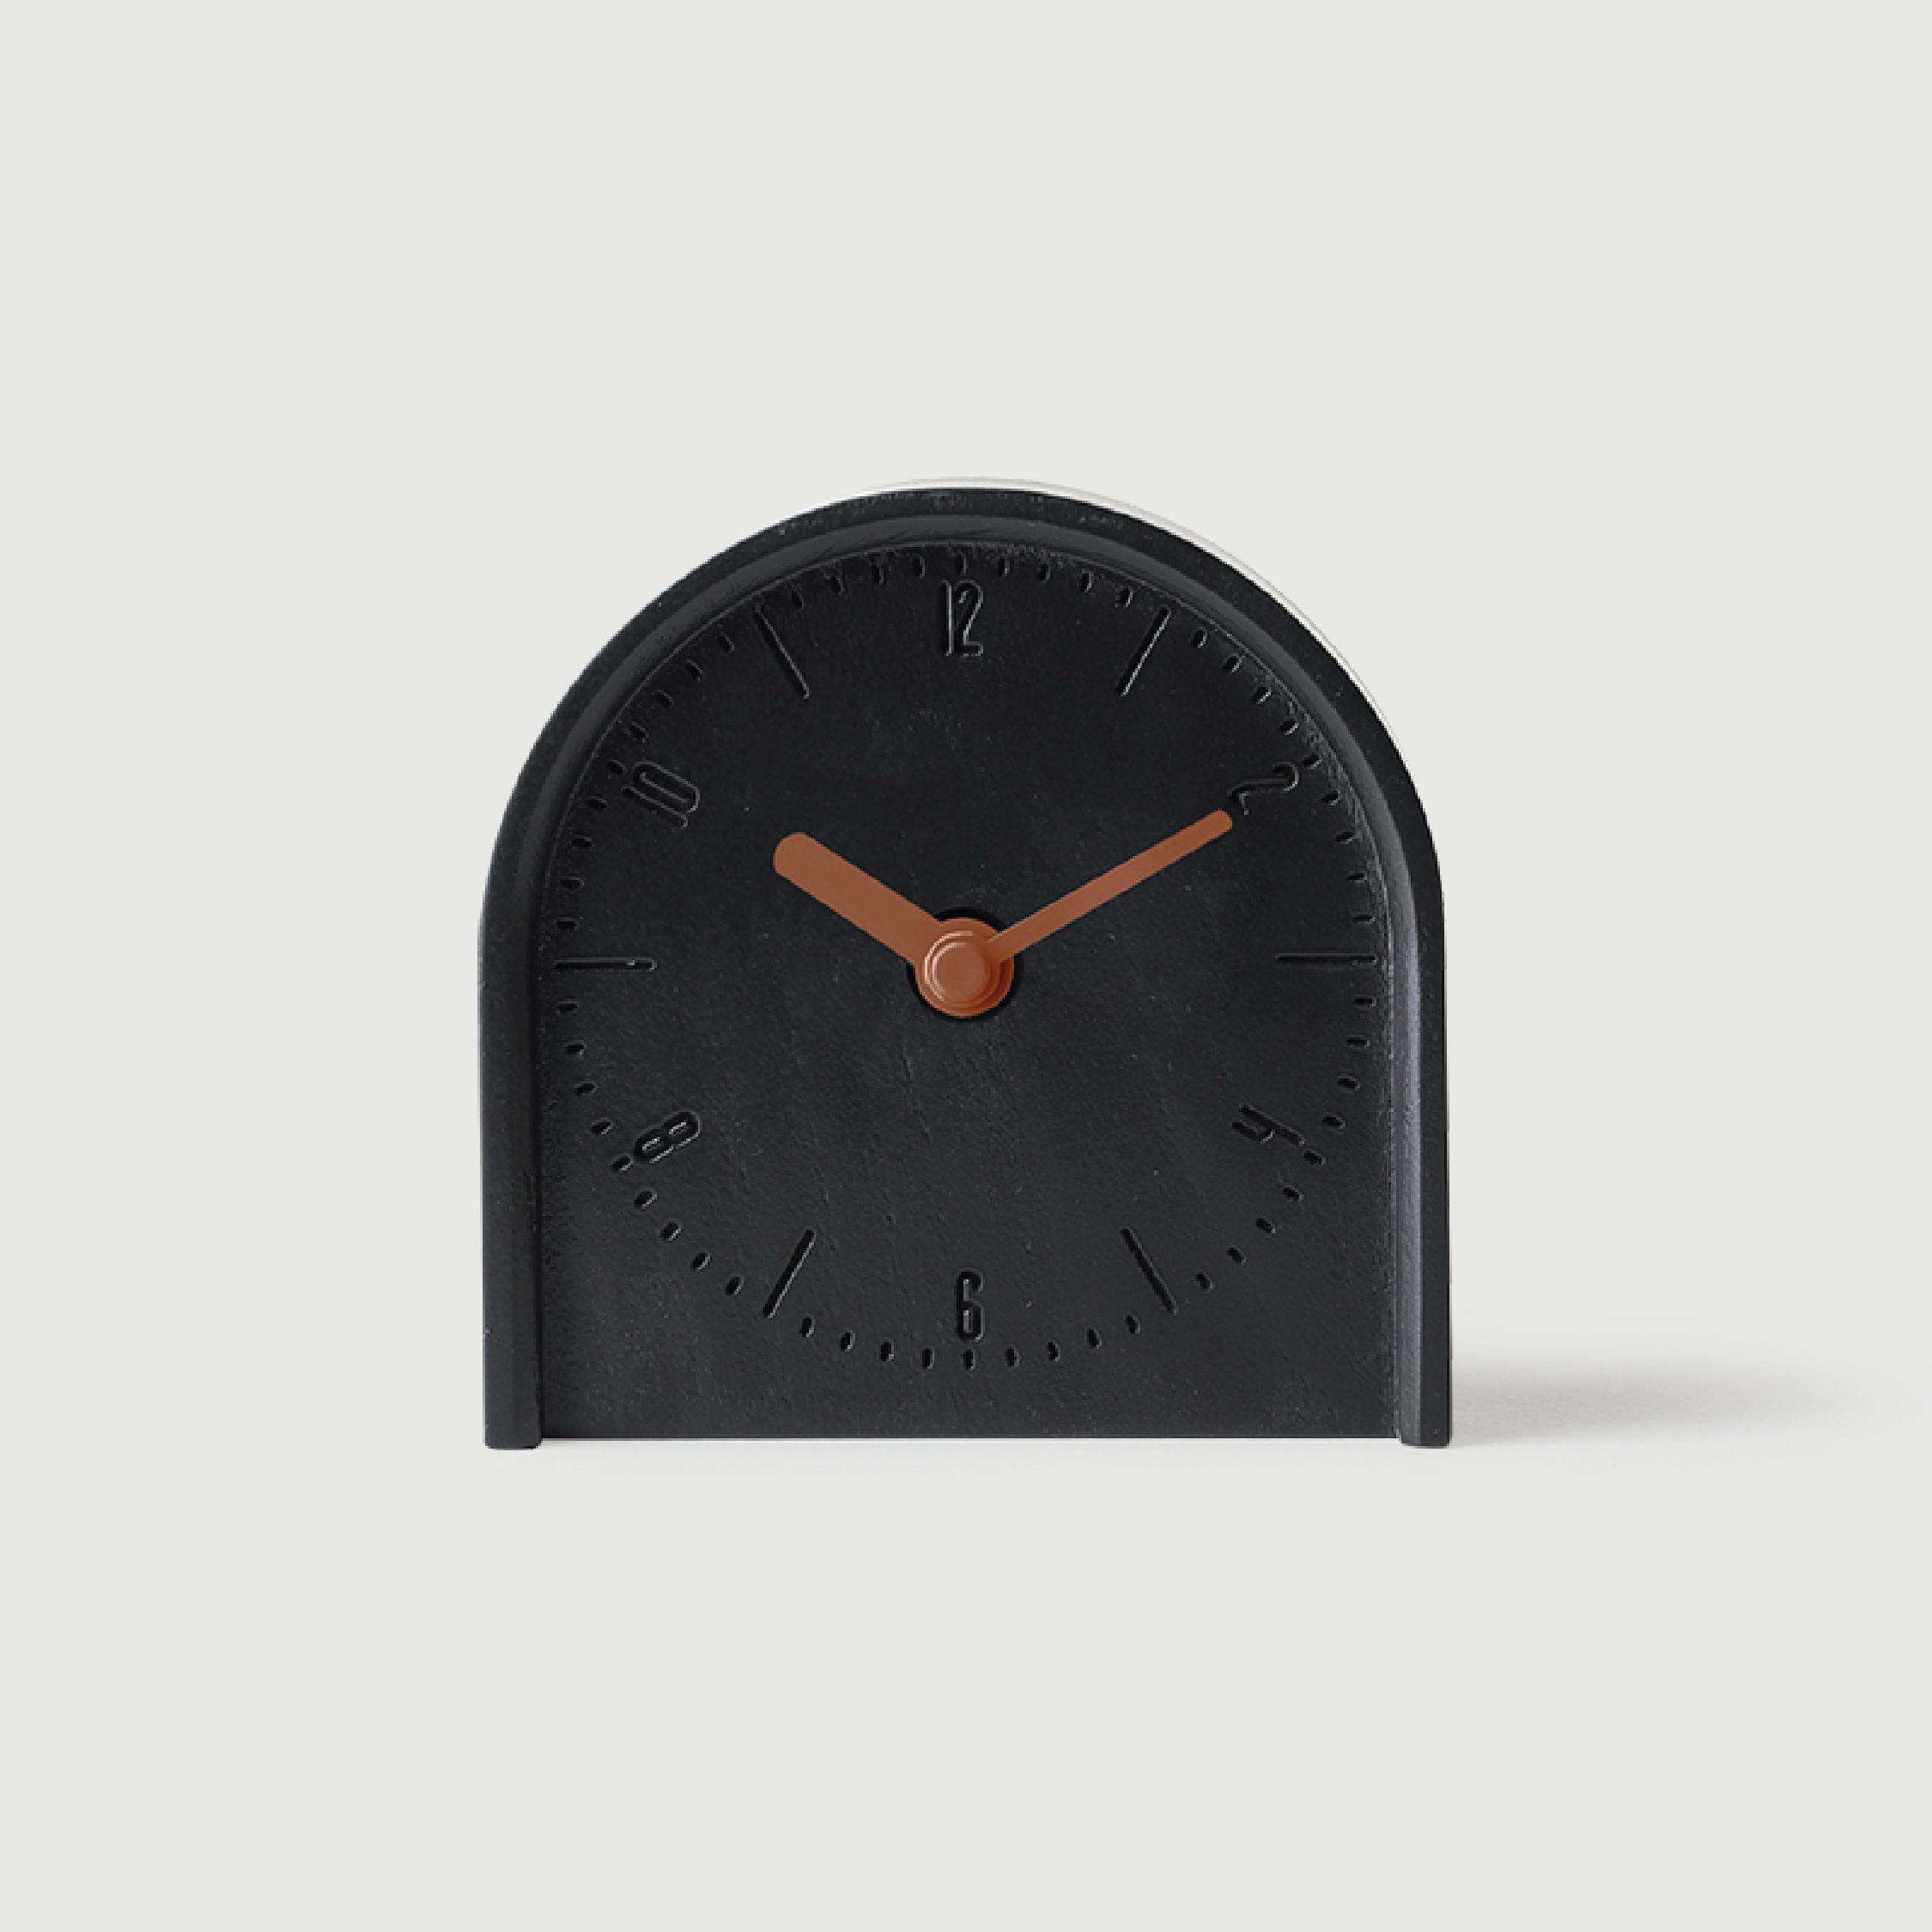 COBY-T-Chacoal B. | Copper H. wall clock